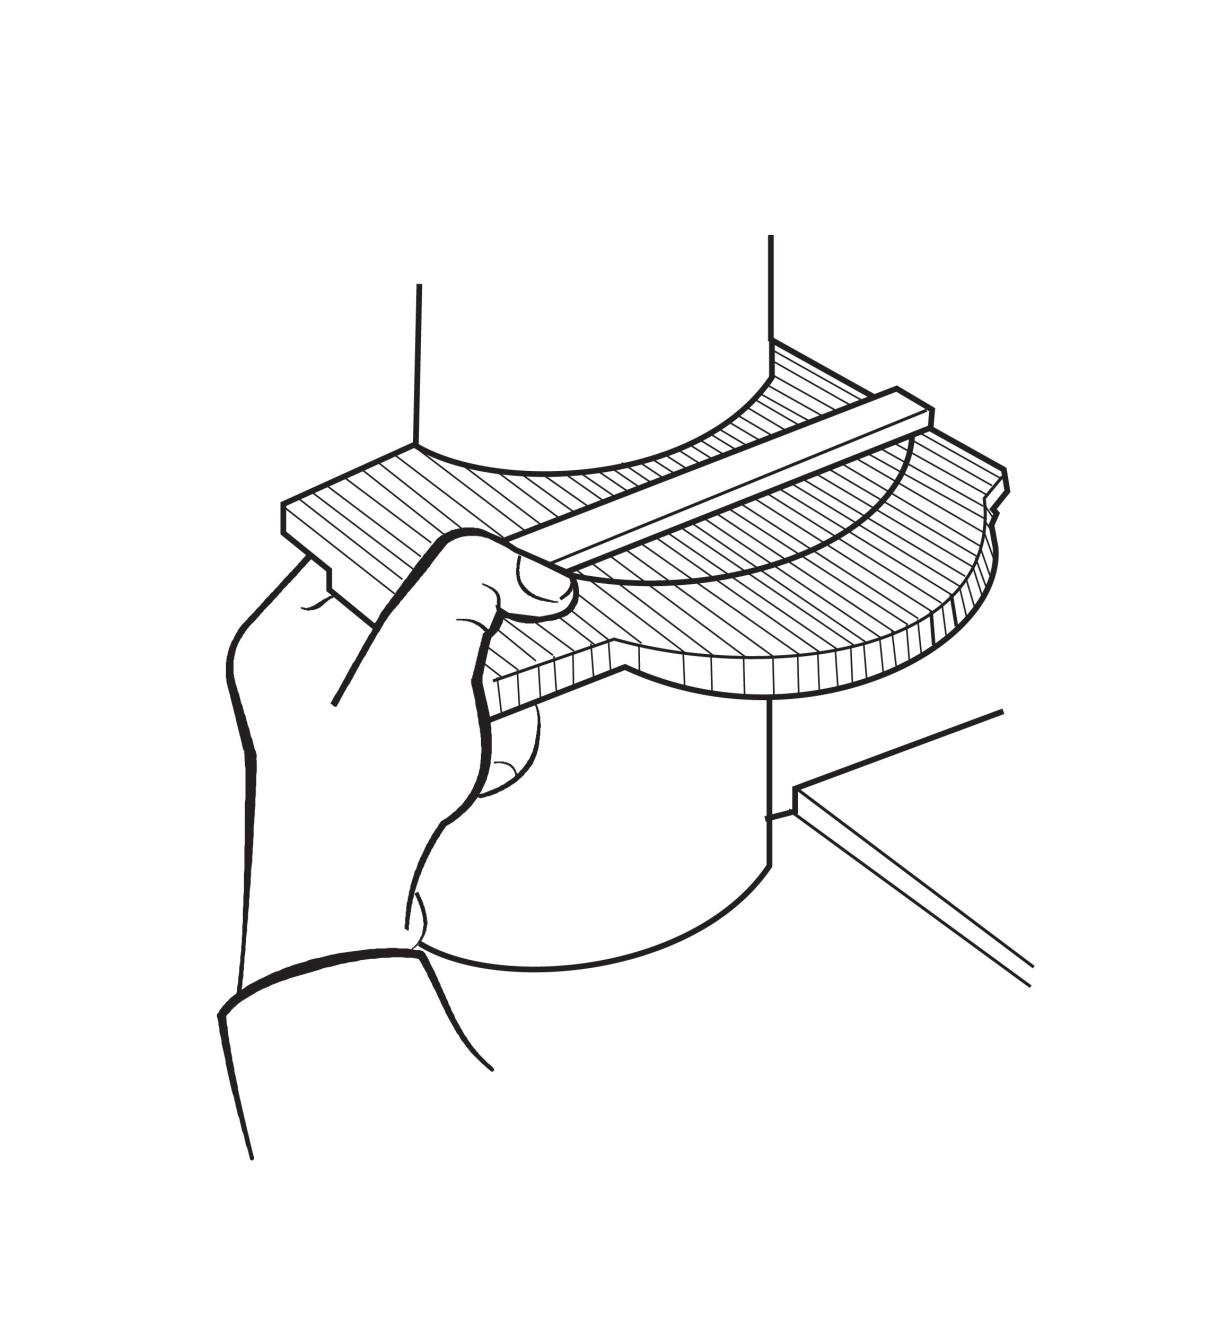 Illustration of person pressing a profile gauge against a curved shape